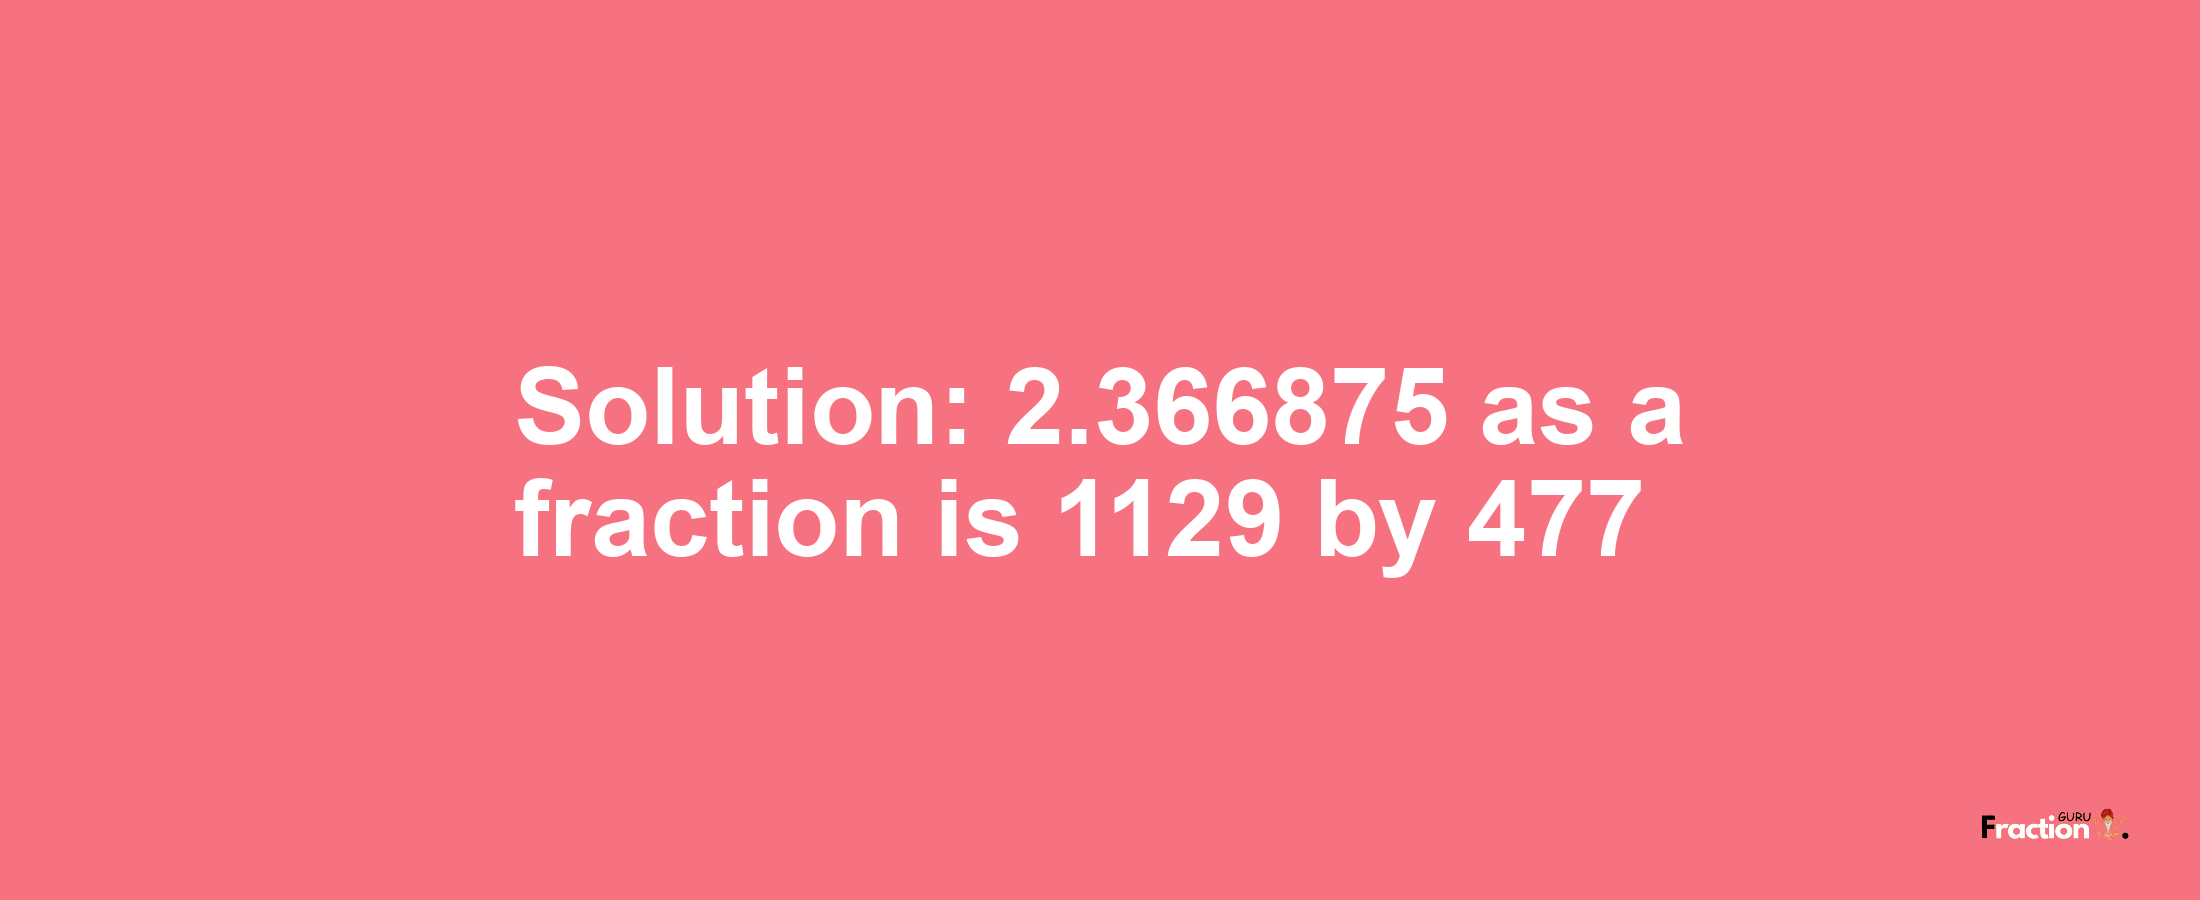 Solution:2.366875 as a fraction is 1129/477